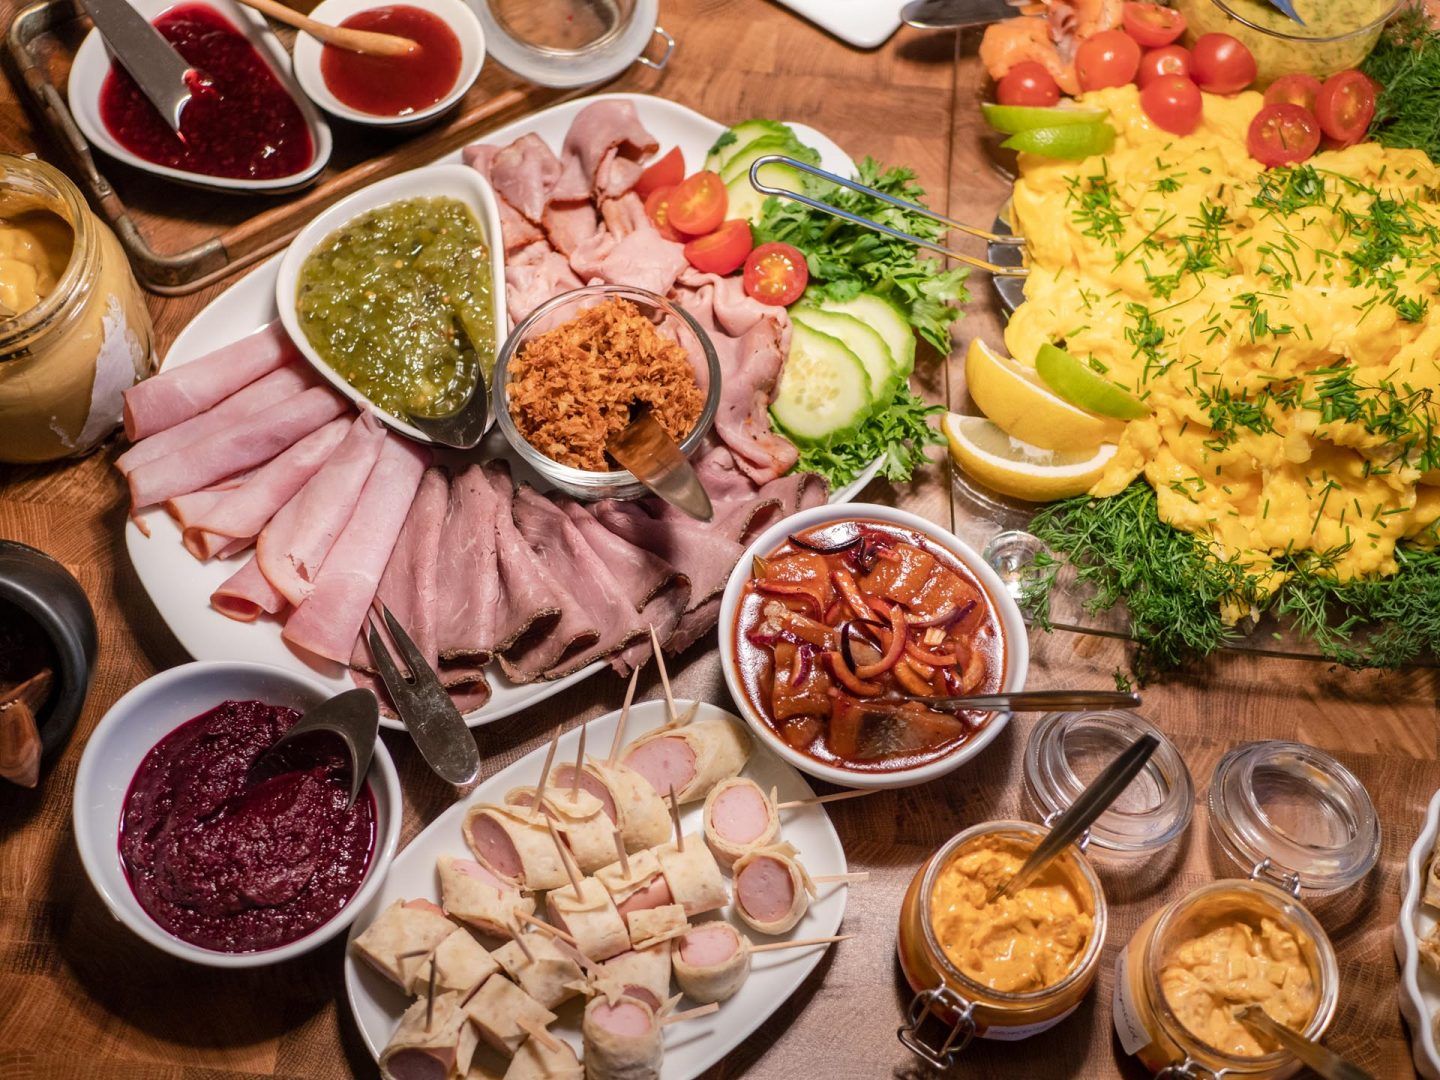 Can You Actually Get at Least 15/20 on This Quiz That’s All About Europe? Swedish cuisine Smörgåsbord smorgasbord